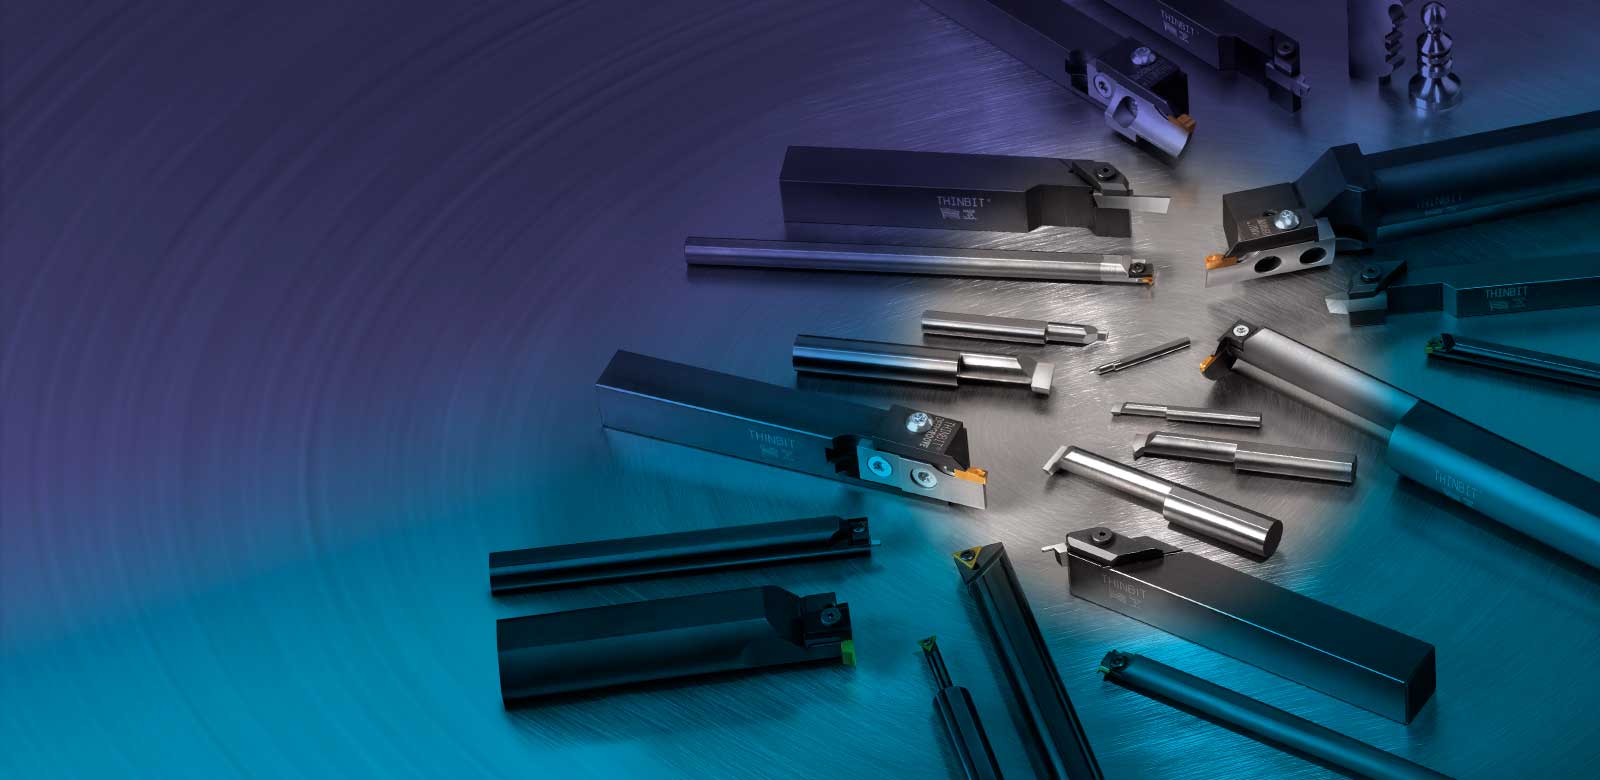 Linked image showing all the ThinBITÂ® complete tooling application solutions.